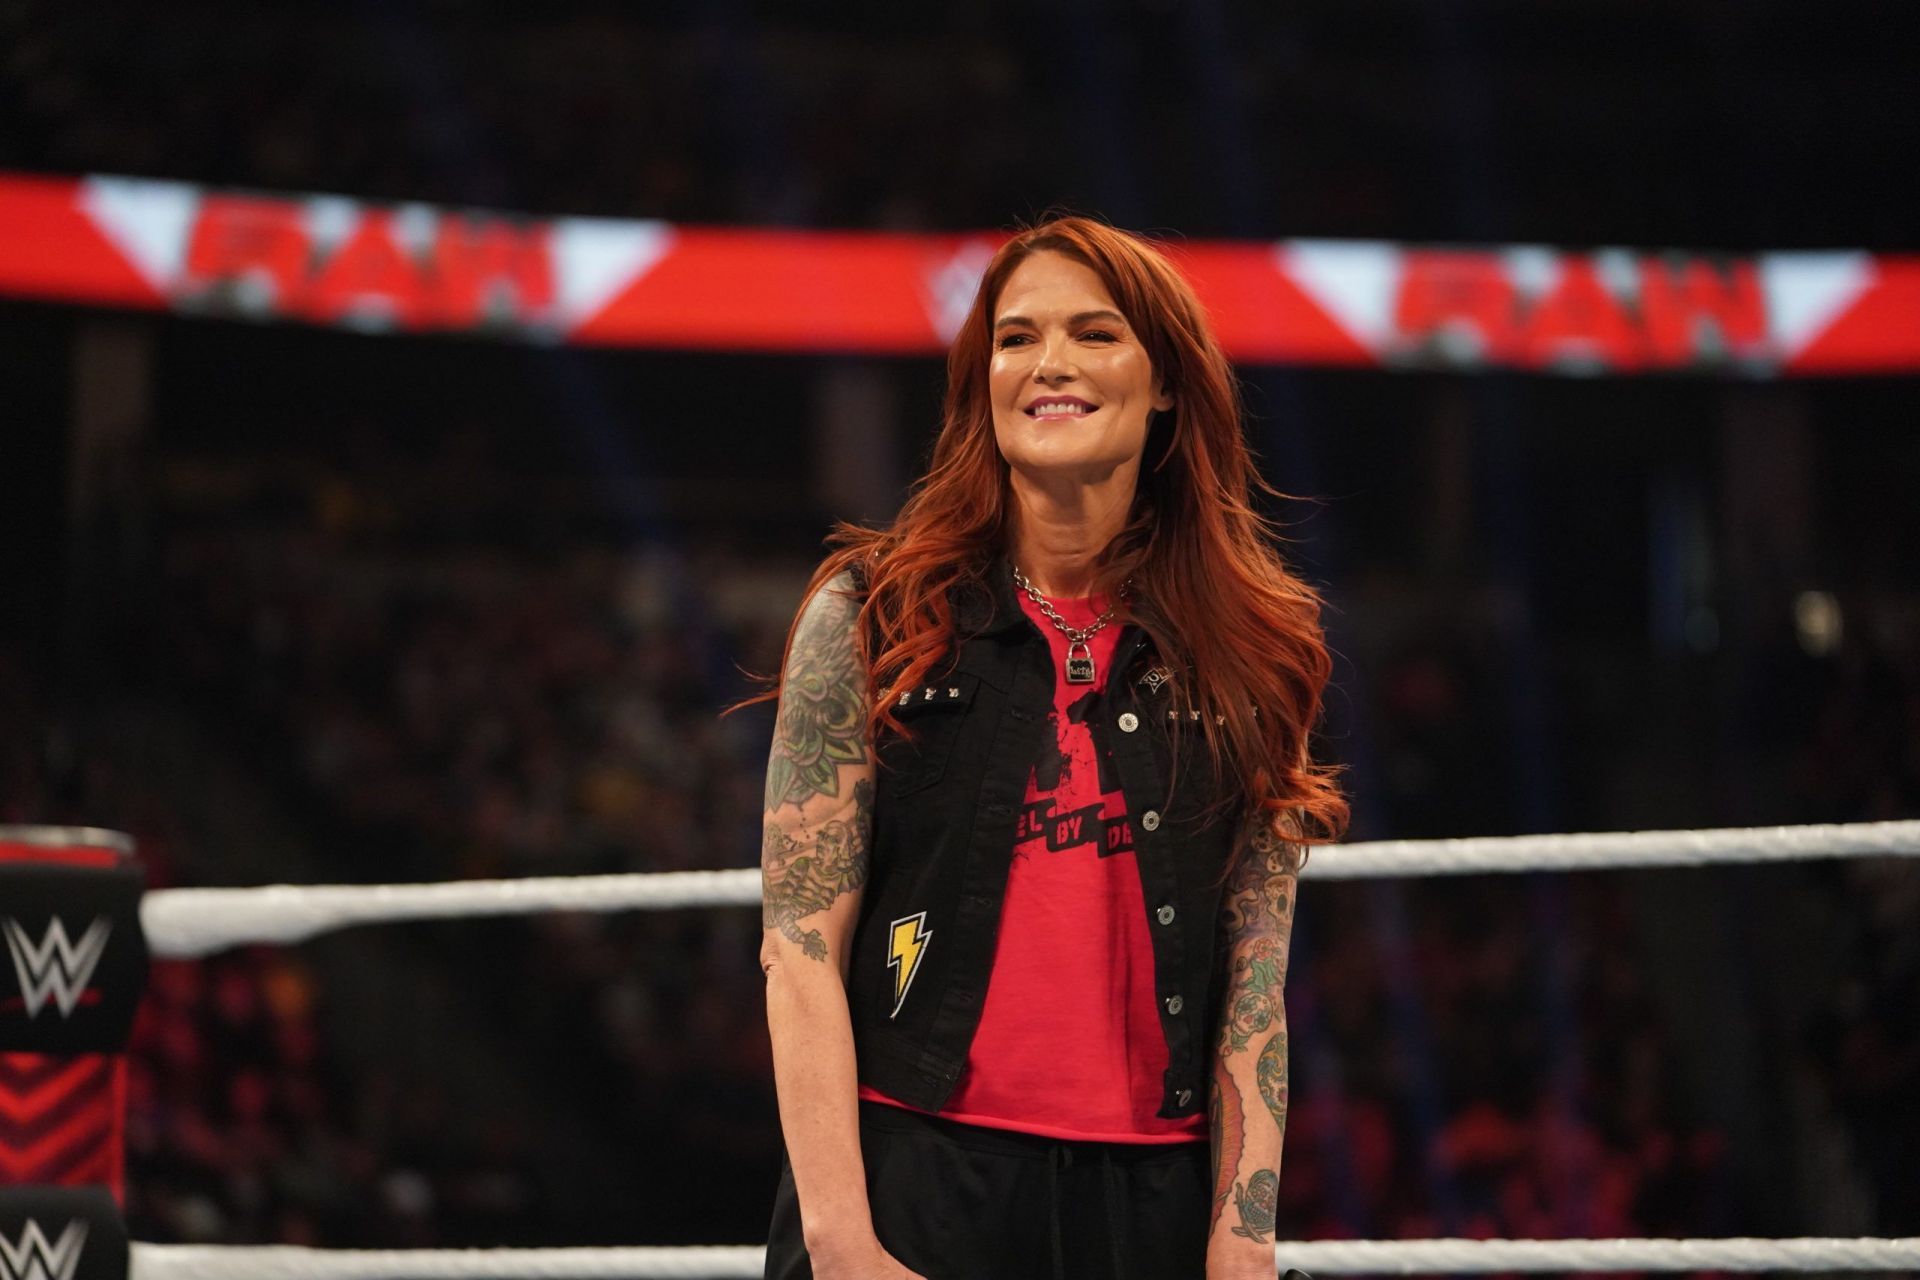 Lita fought Trish many times throughout her career. They&#039;ve also teamed together